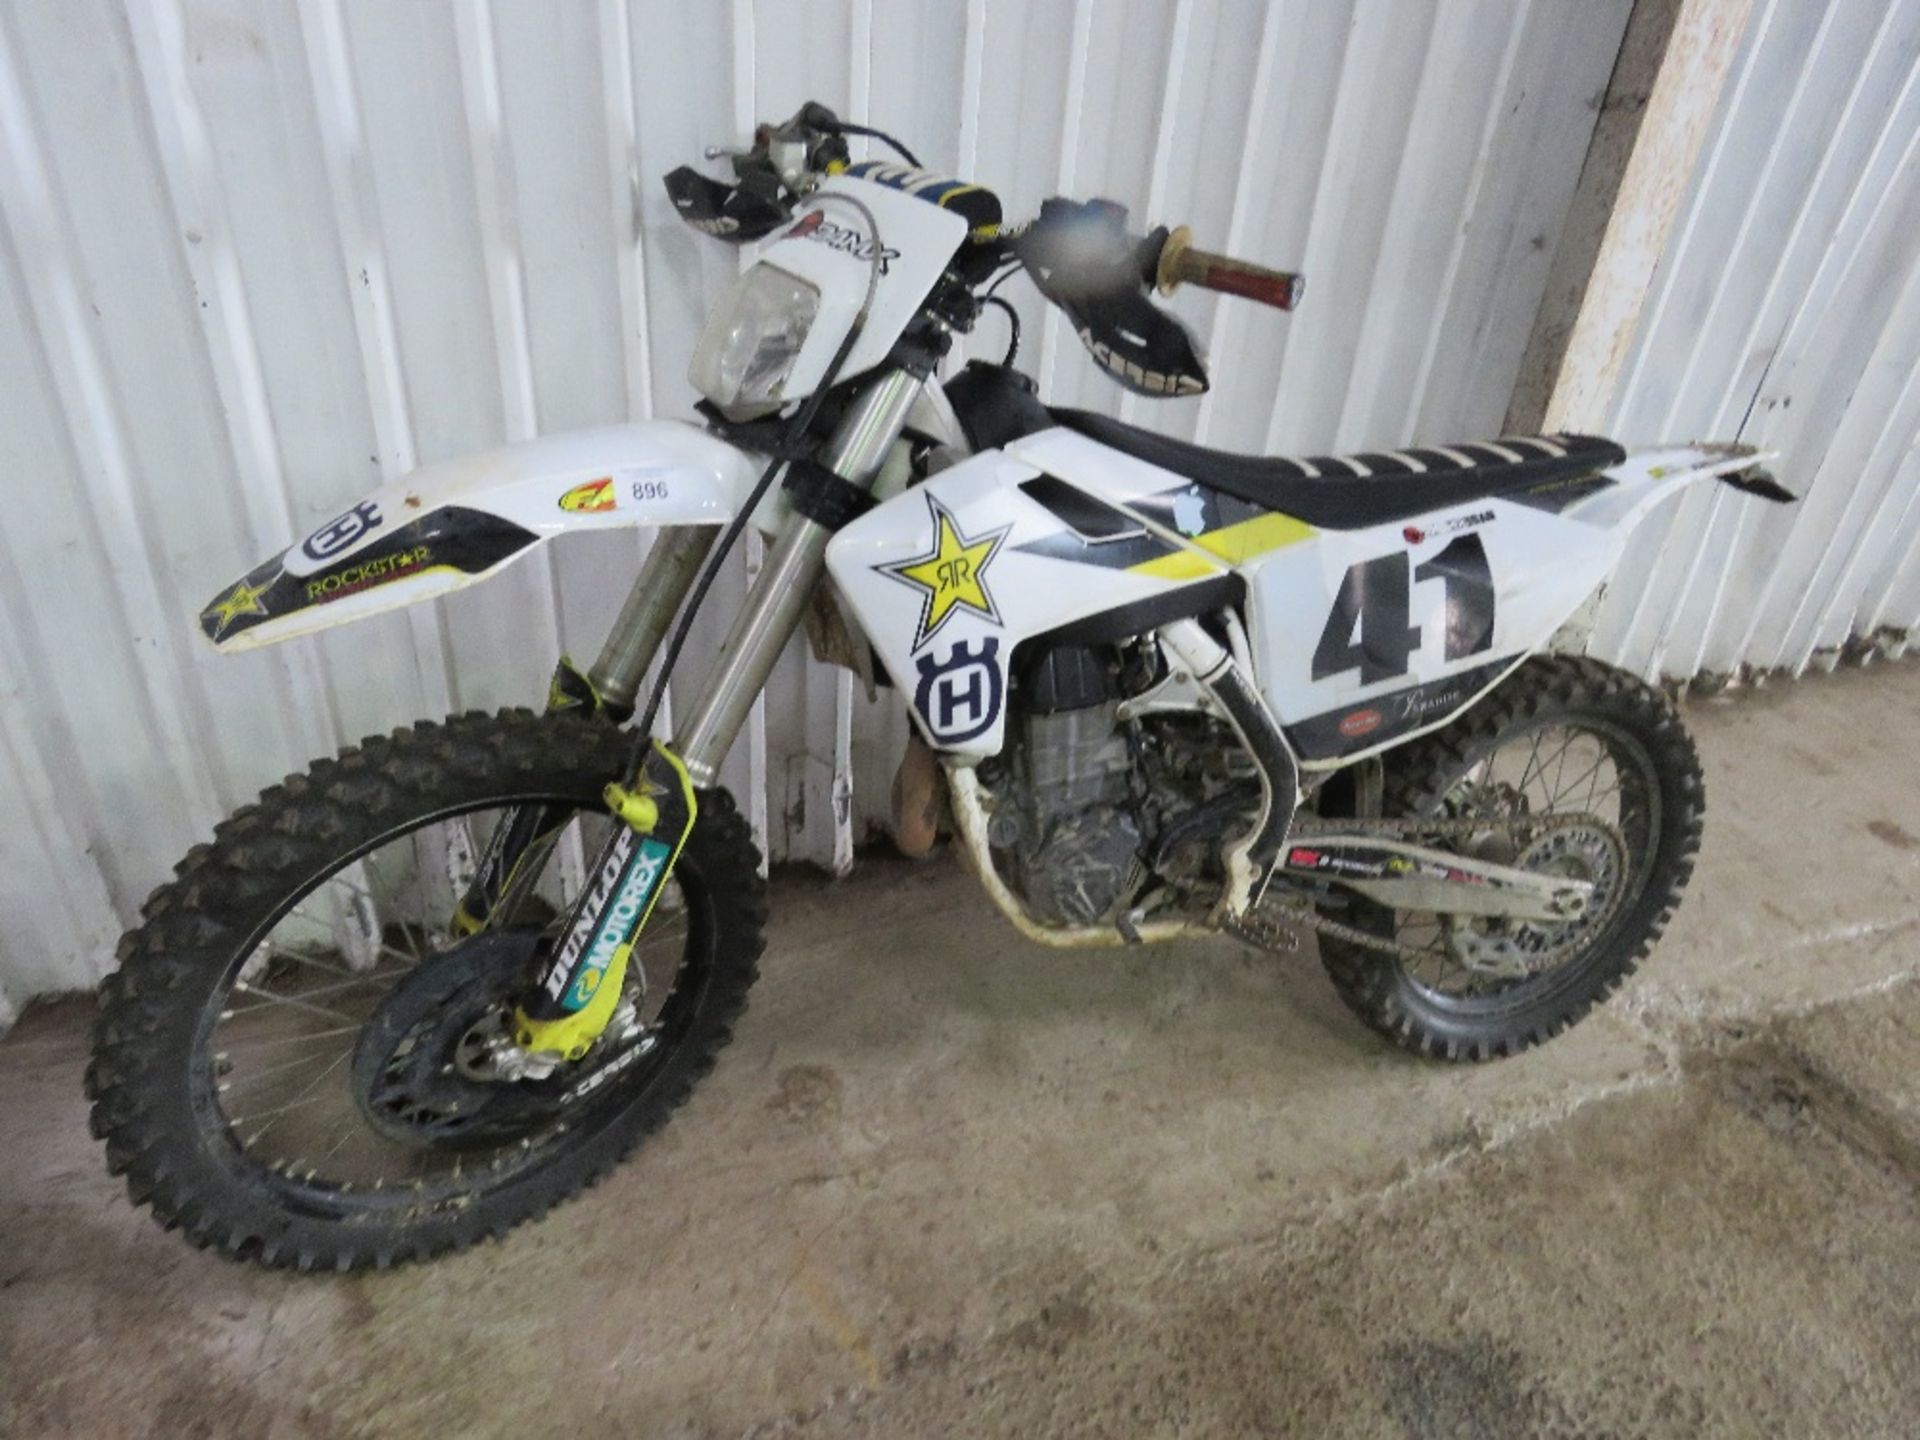 HUSQVARNA 450CC TRIALS BIKE, REG:LK18 EXO WITH V5 (FIRST ROAD REGISTERED 2021). WHEN TESTED WAS SEE